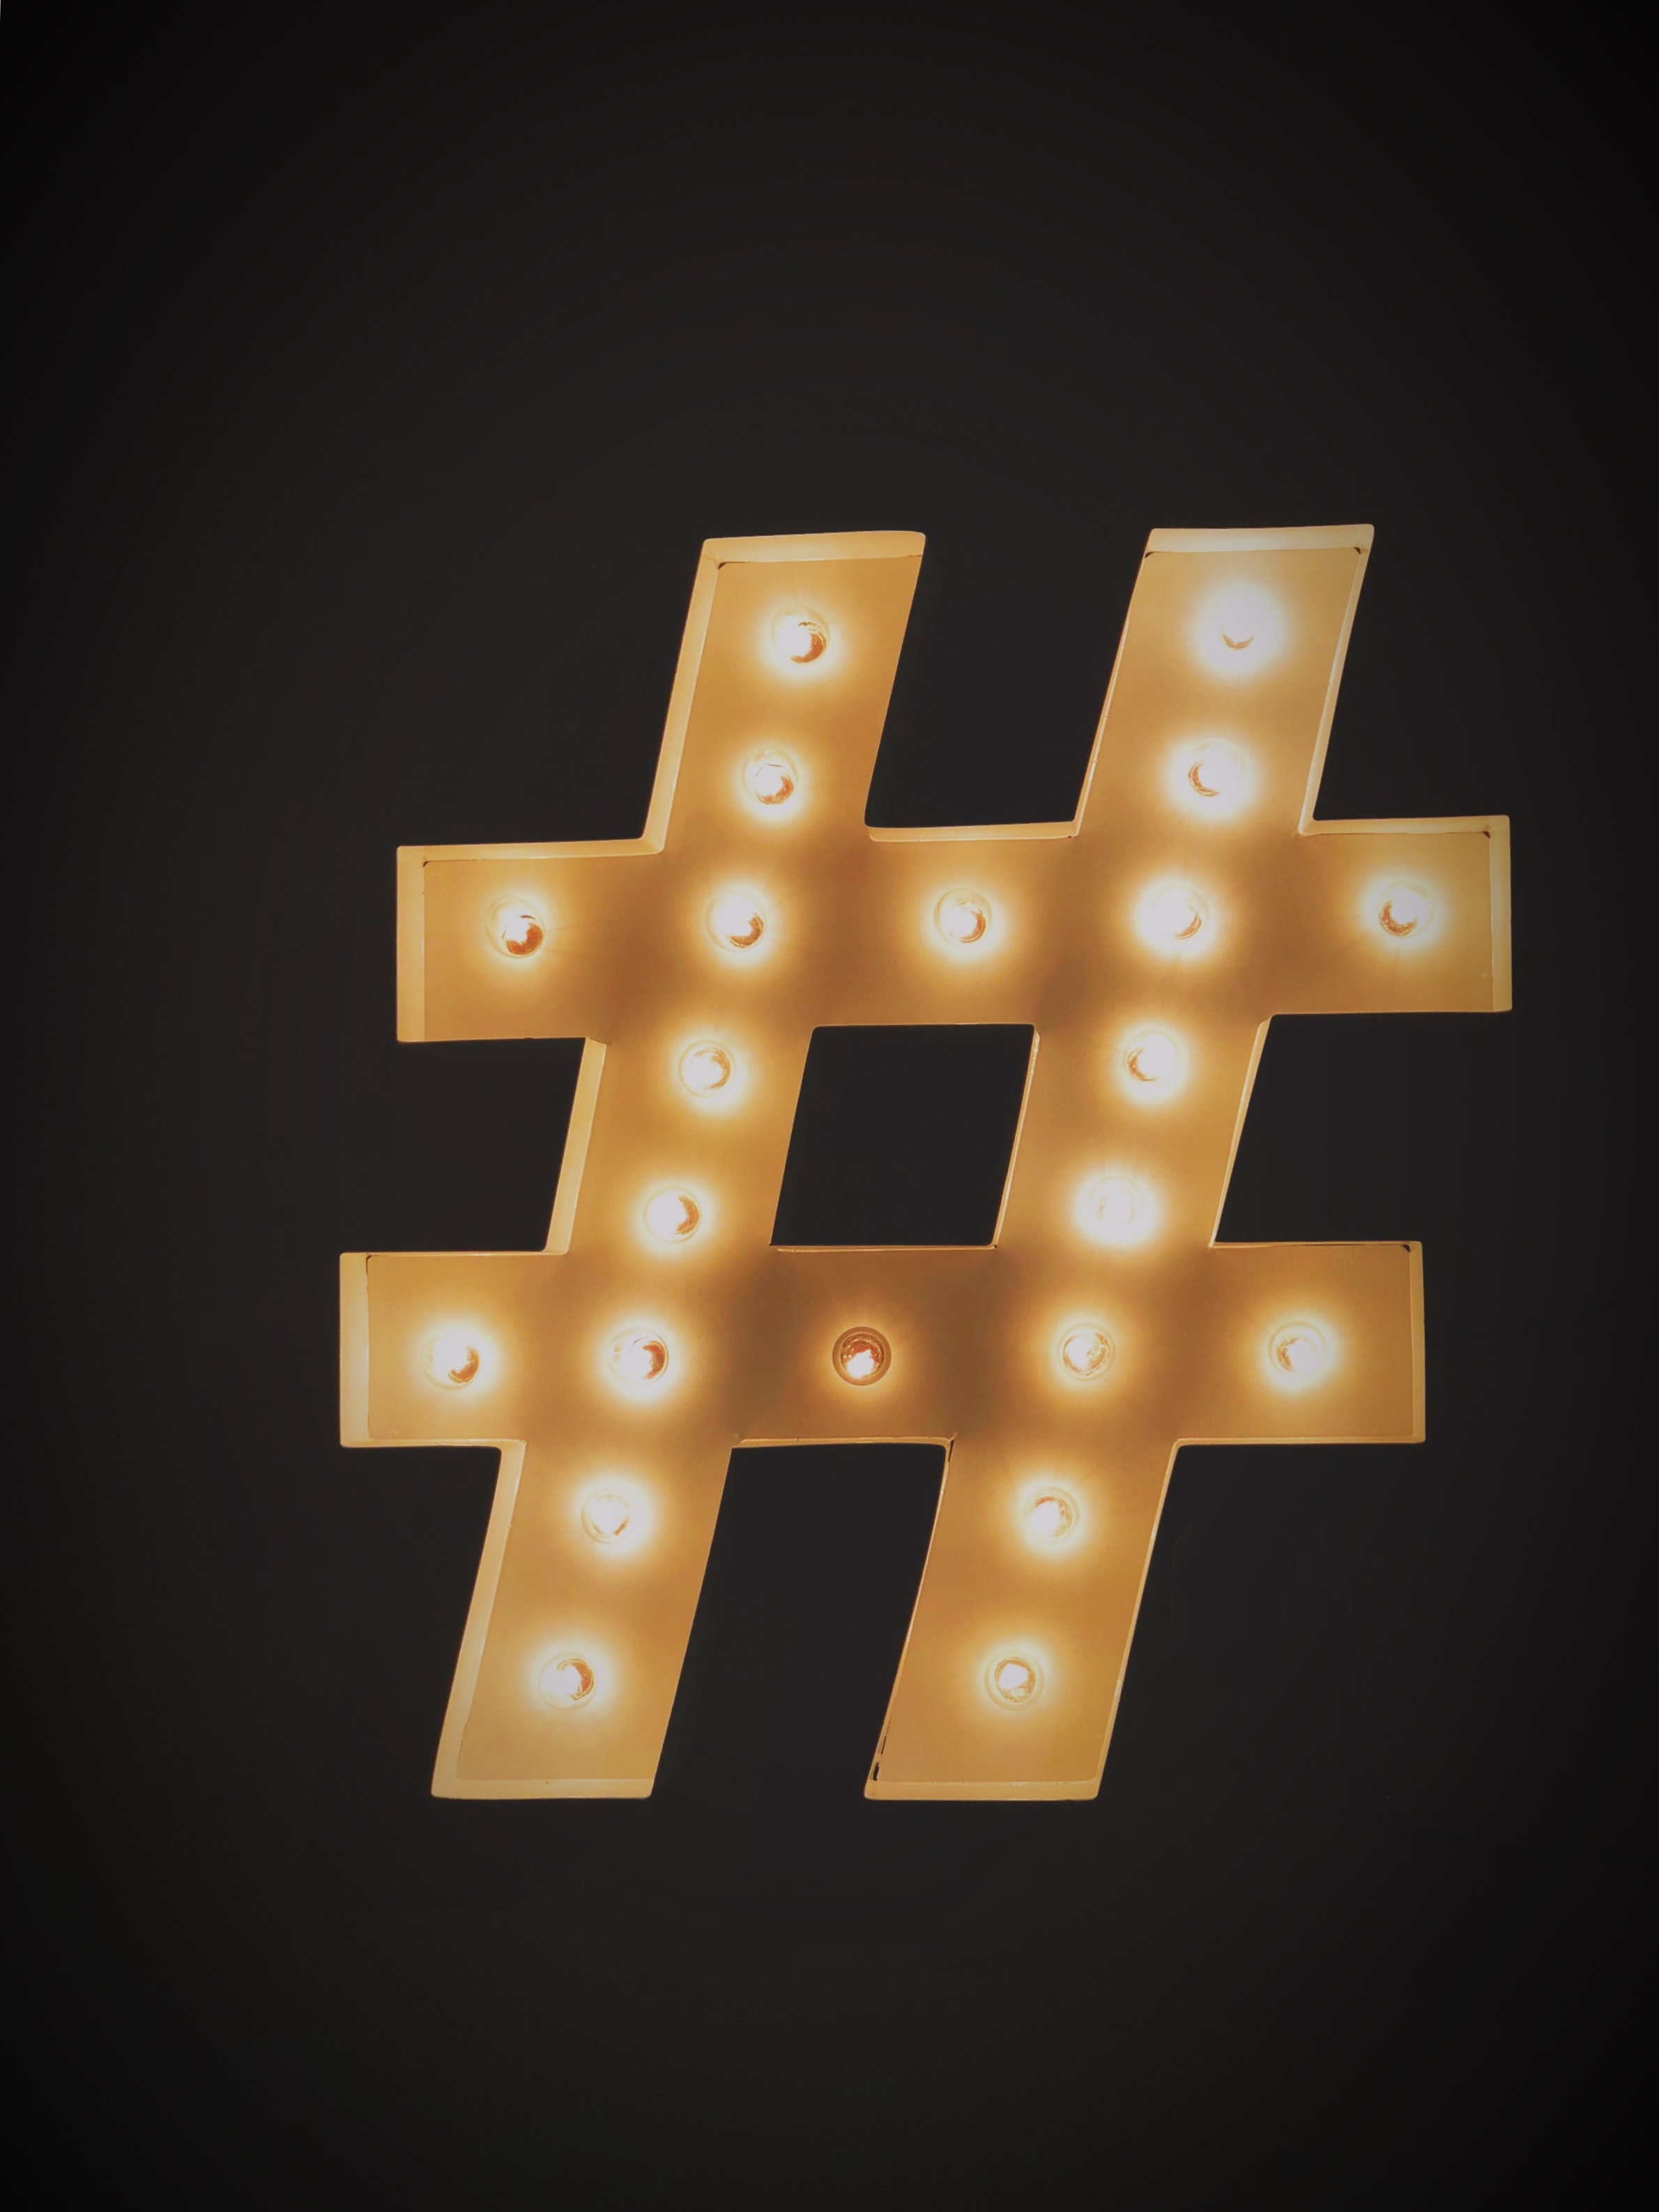 Hashtag Strategy - A big Hashtag sign with shining lights,